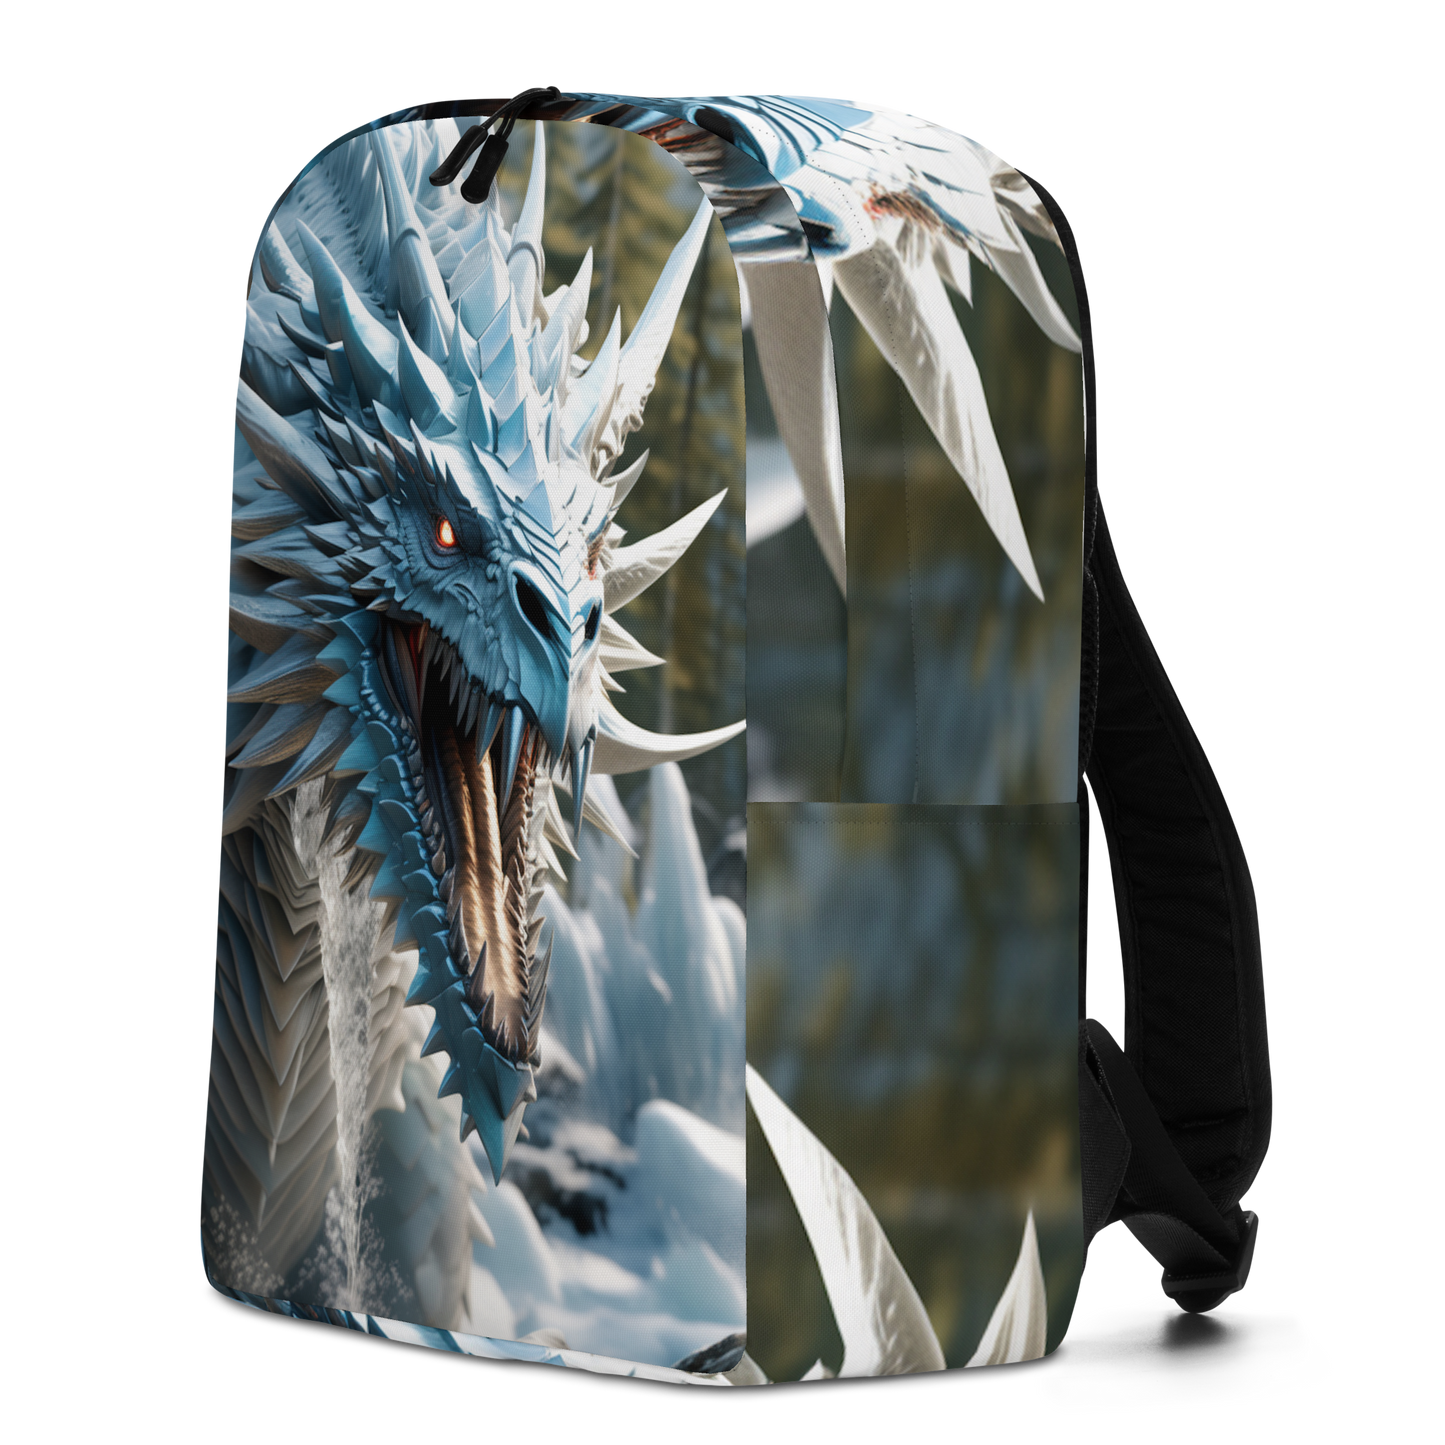 Ice Dragon Backpack